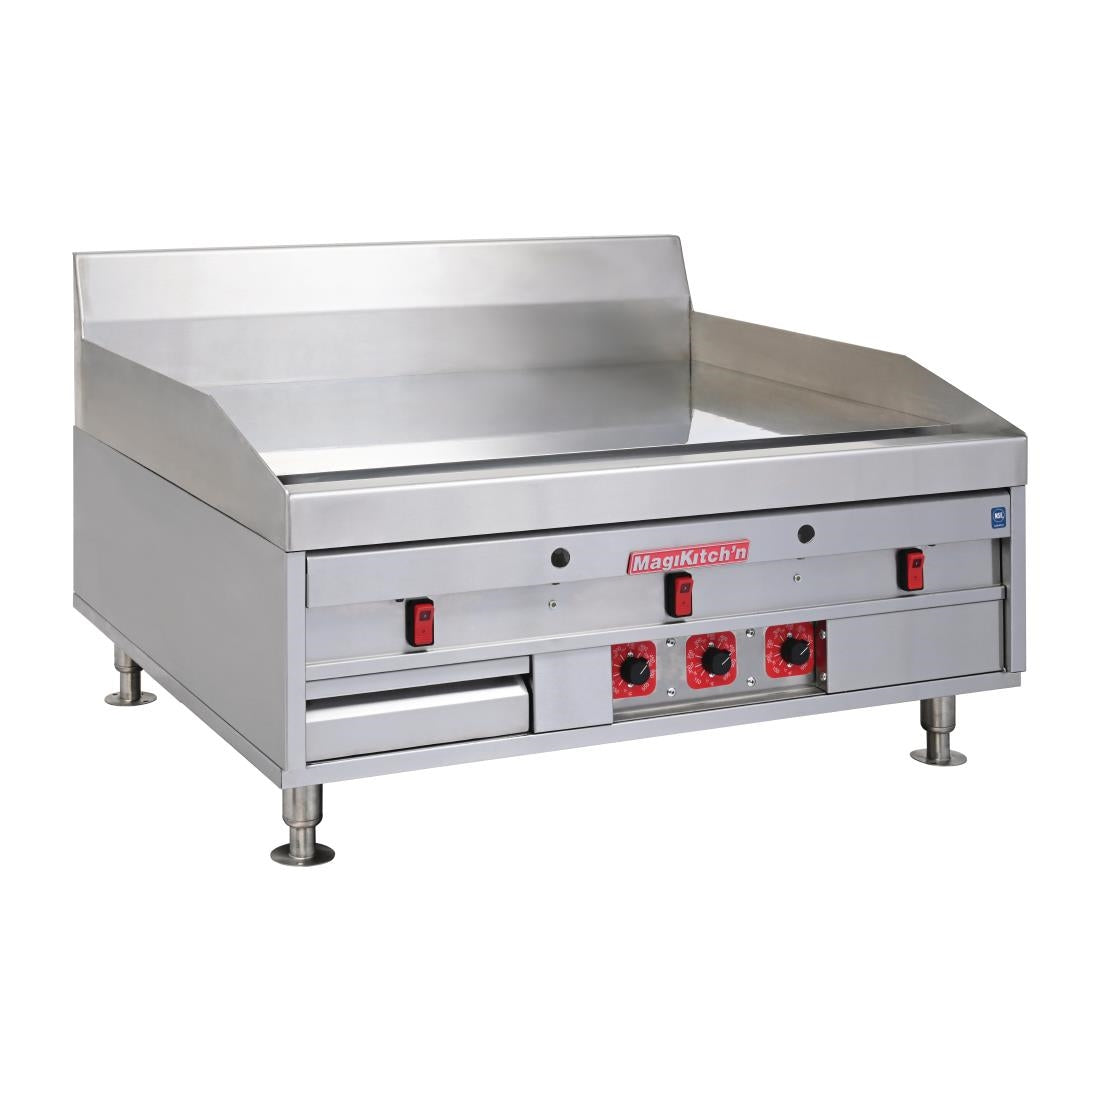 FP883 MagiKitch'n Heavy Duty Chrome Griddle MKG48 JD Catering Equipment Solutions Ltd